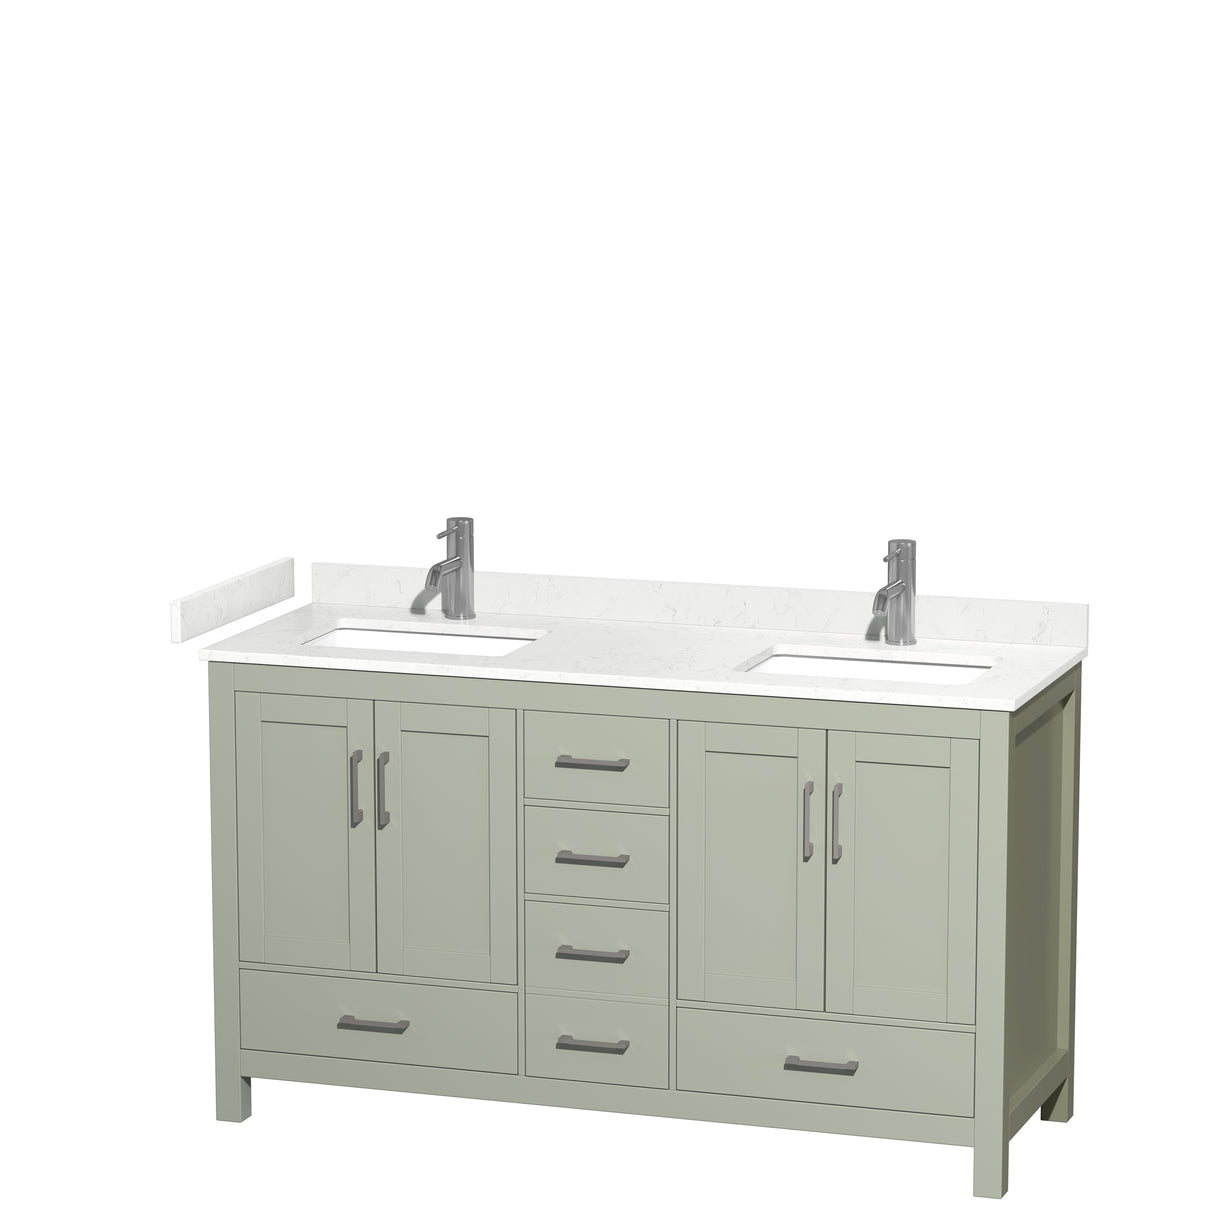 Sheffield 60 inch Double Bathroom Vanity in Light Green Carrara Cultured Marble Countertop Undermount Square Sinks Brushed Nickel Trim